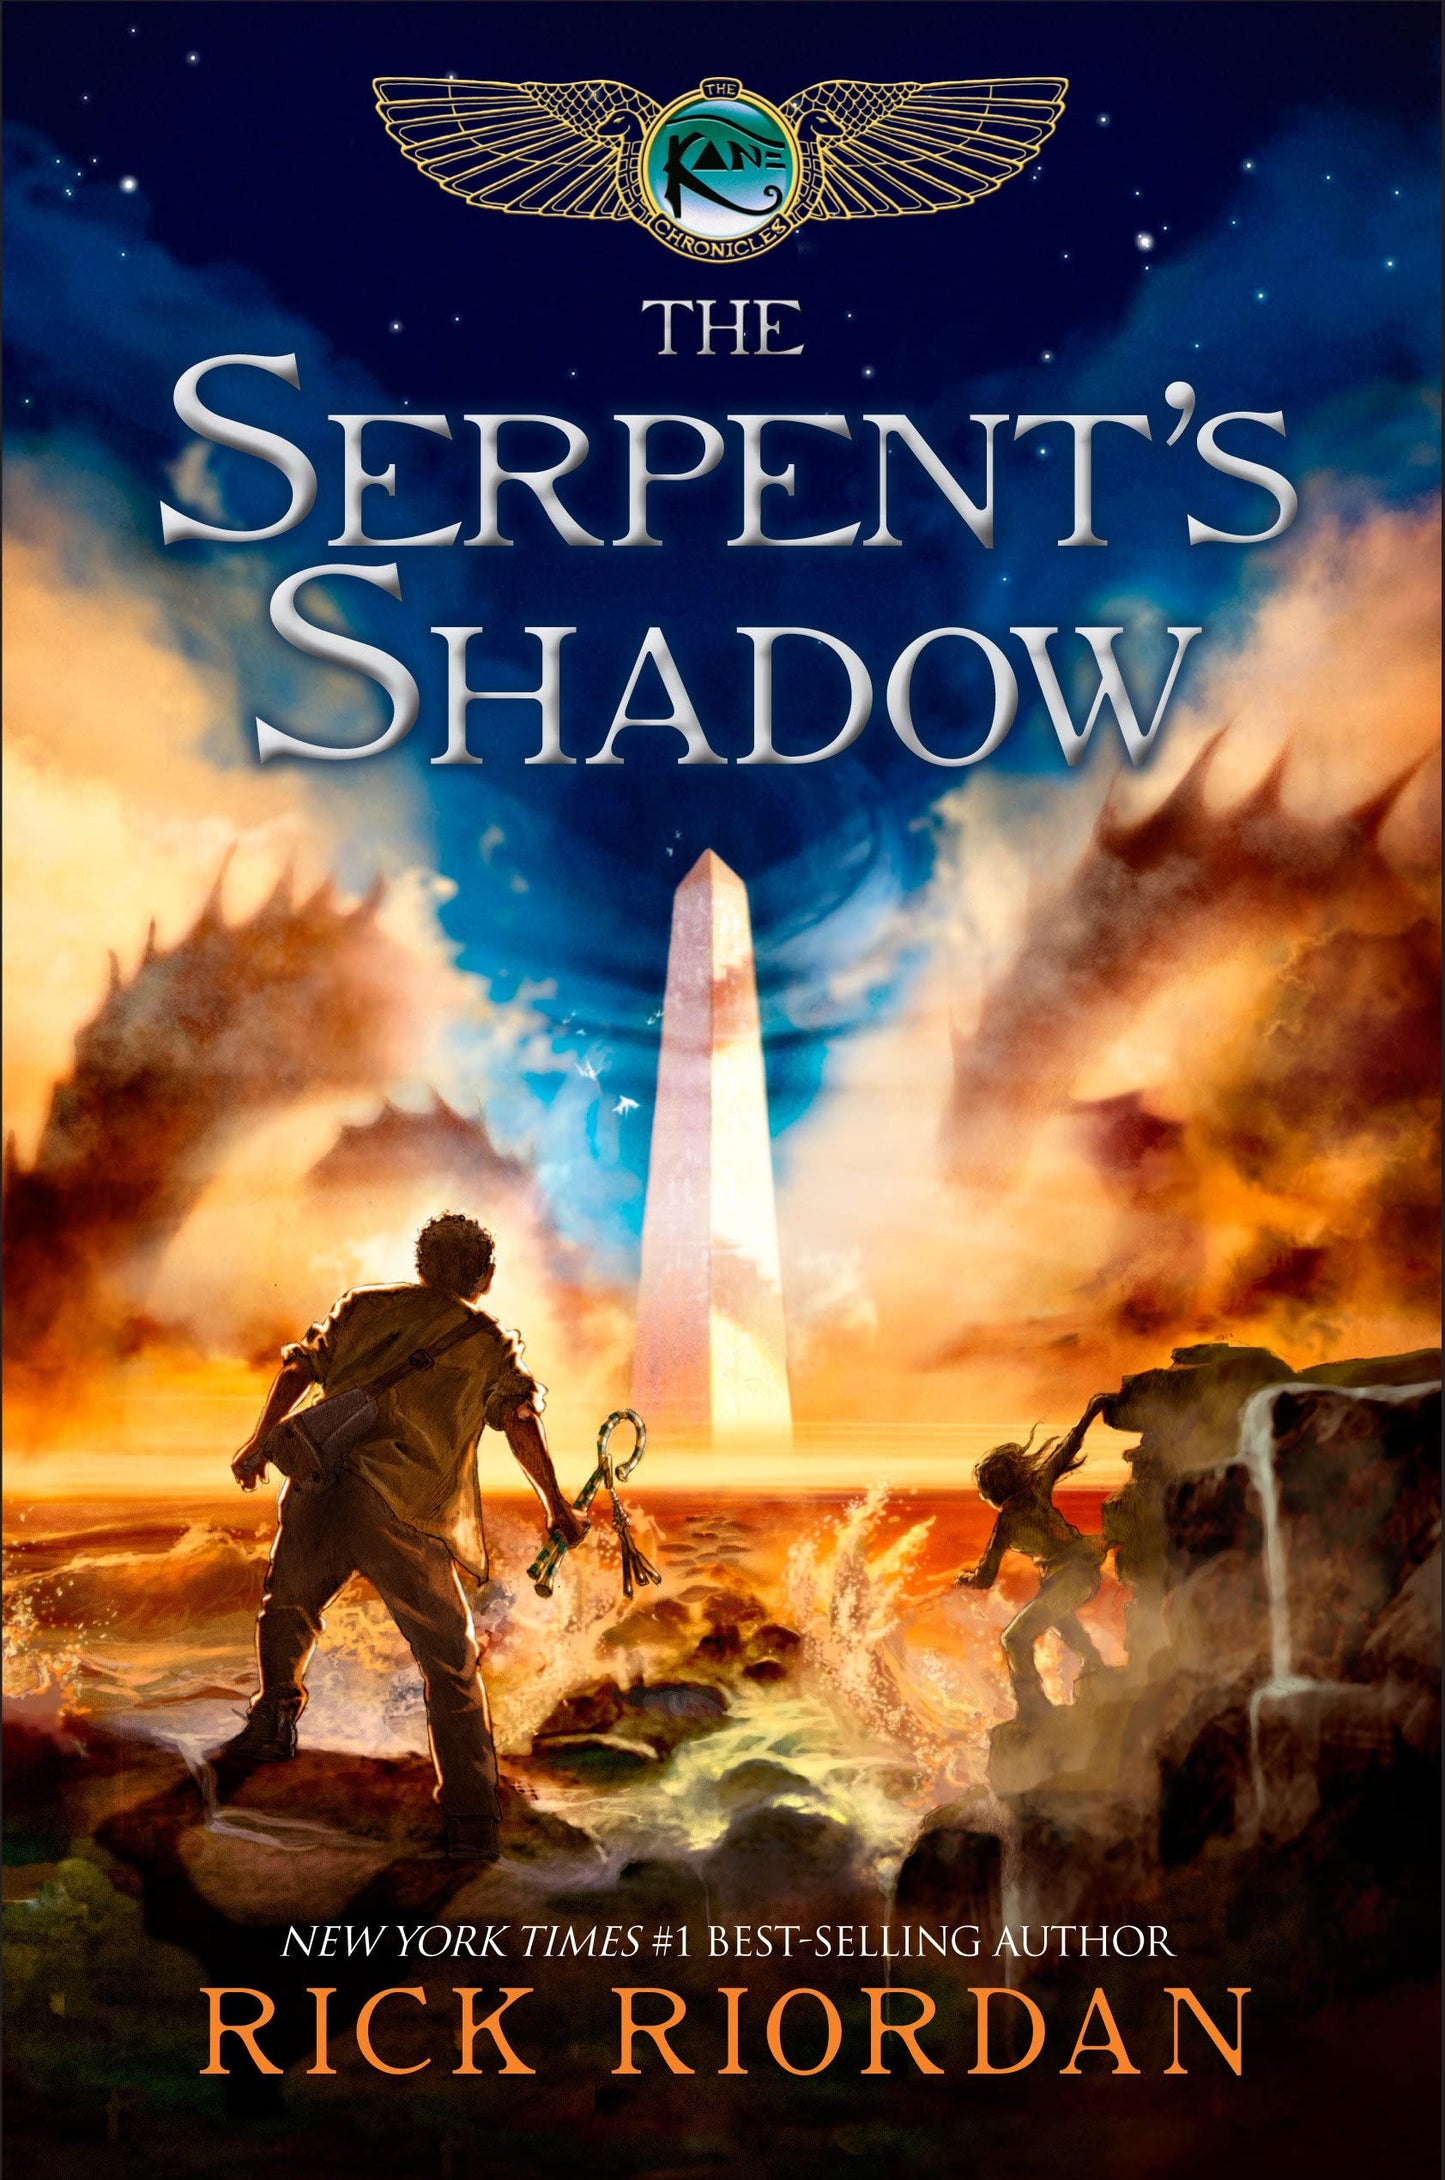 The Serpent's Shadow (The Kane Chronicles, Book 3)